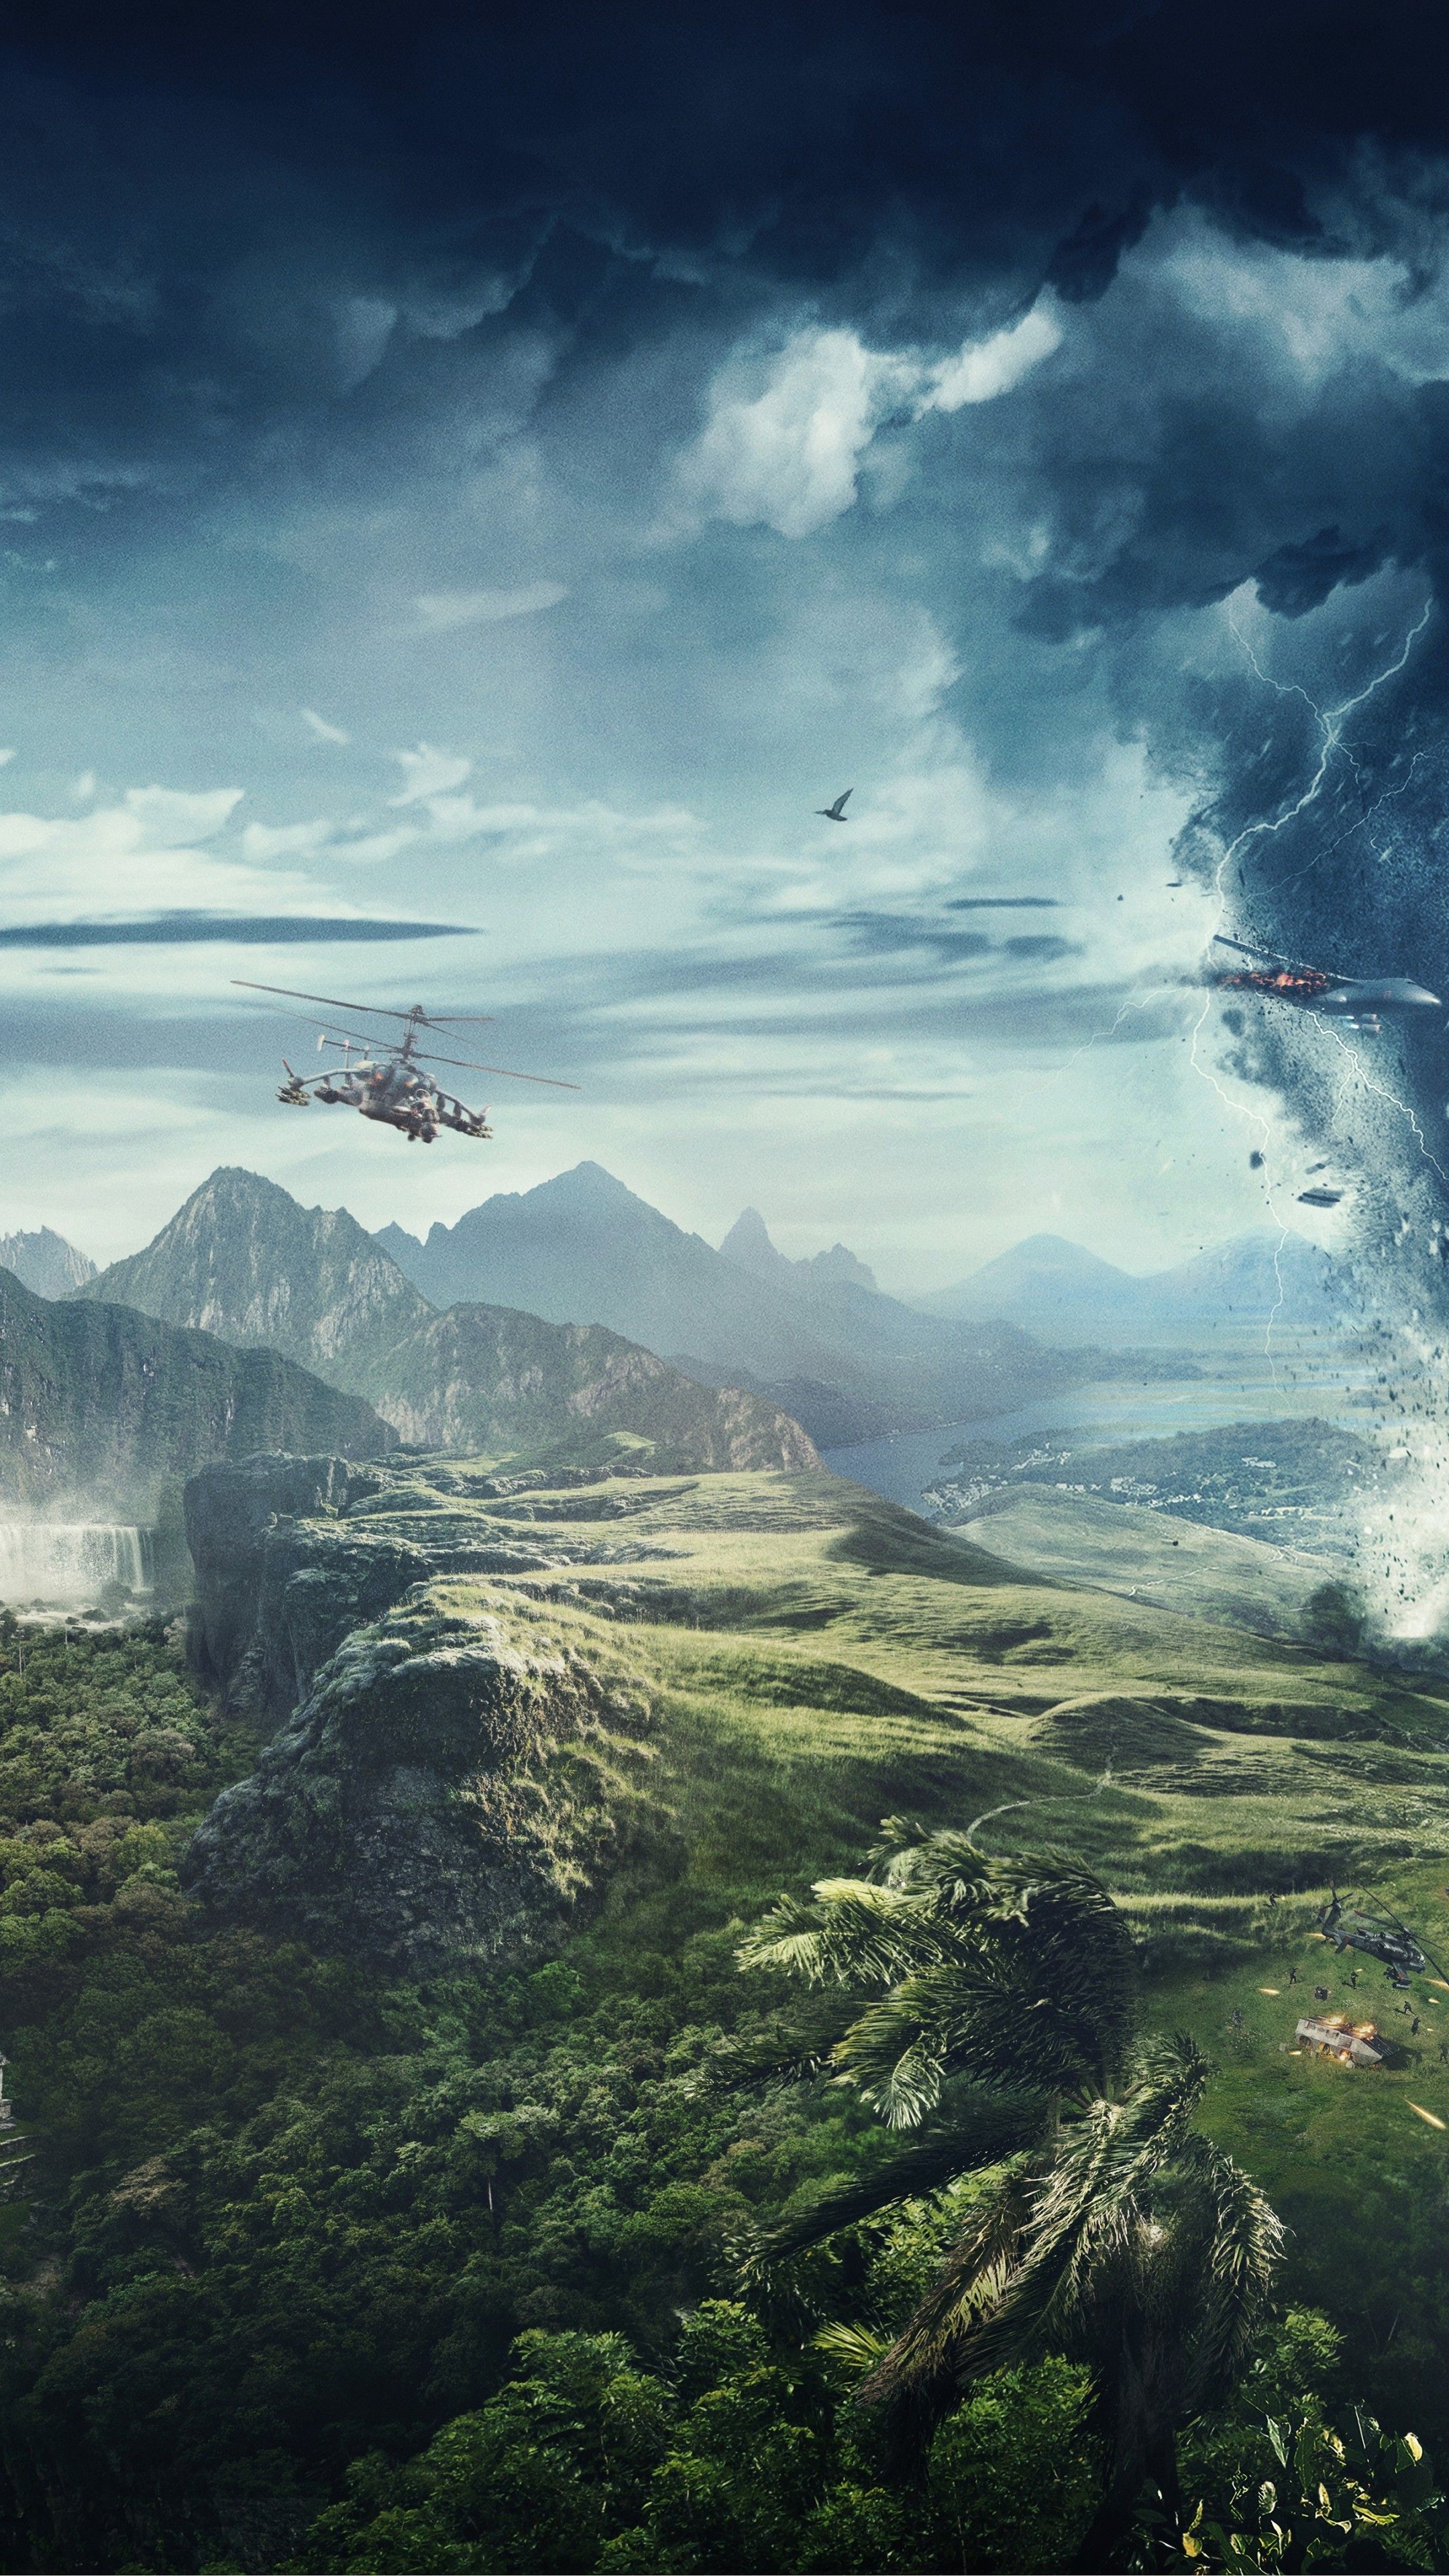 5120x1440p 329 just cause 4 wallpapers